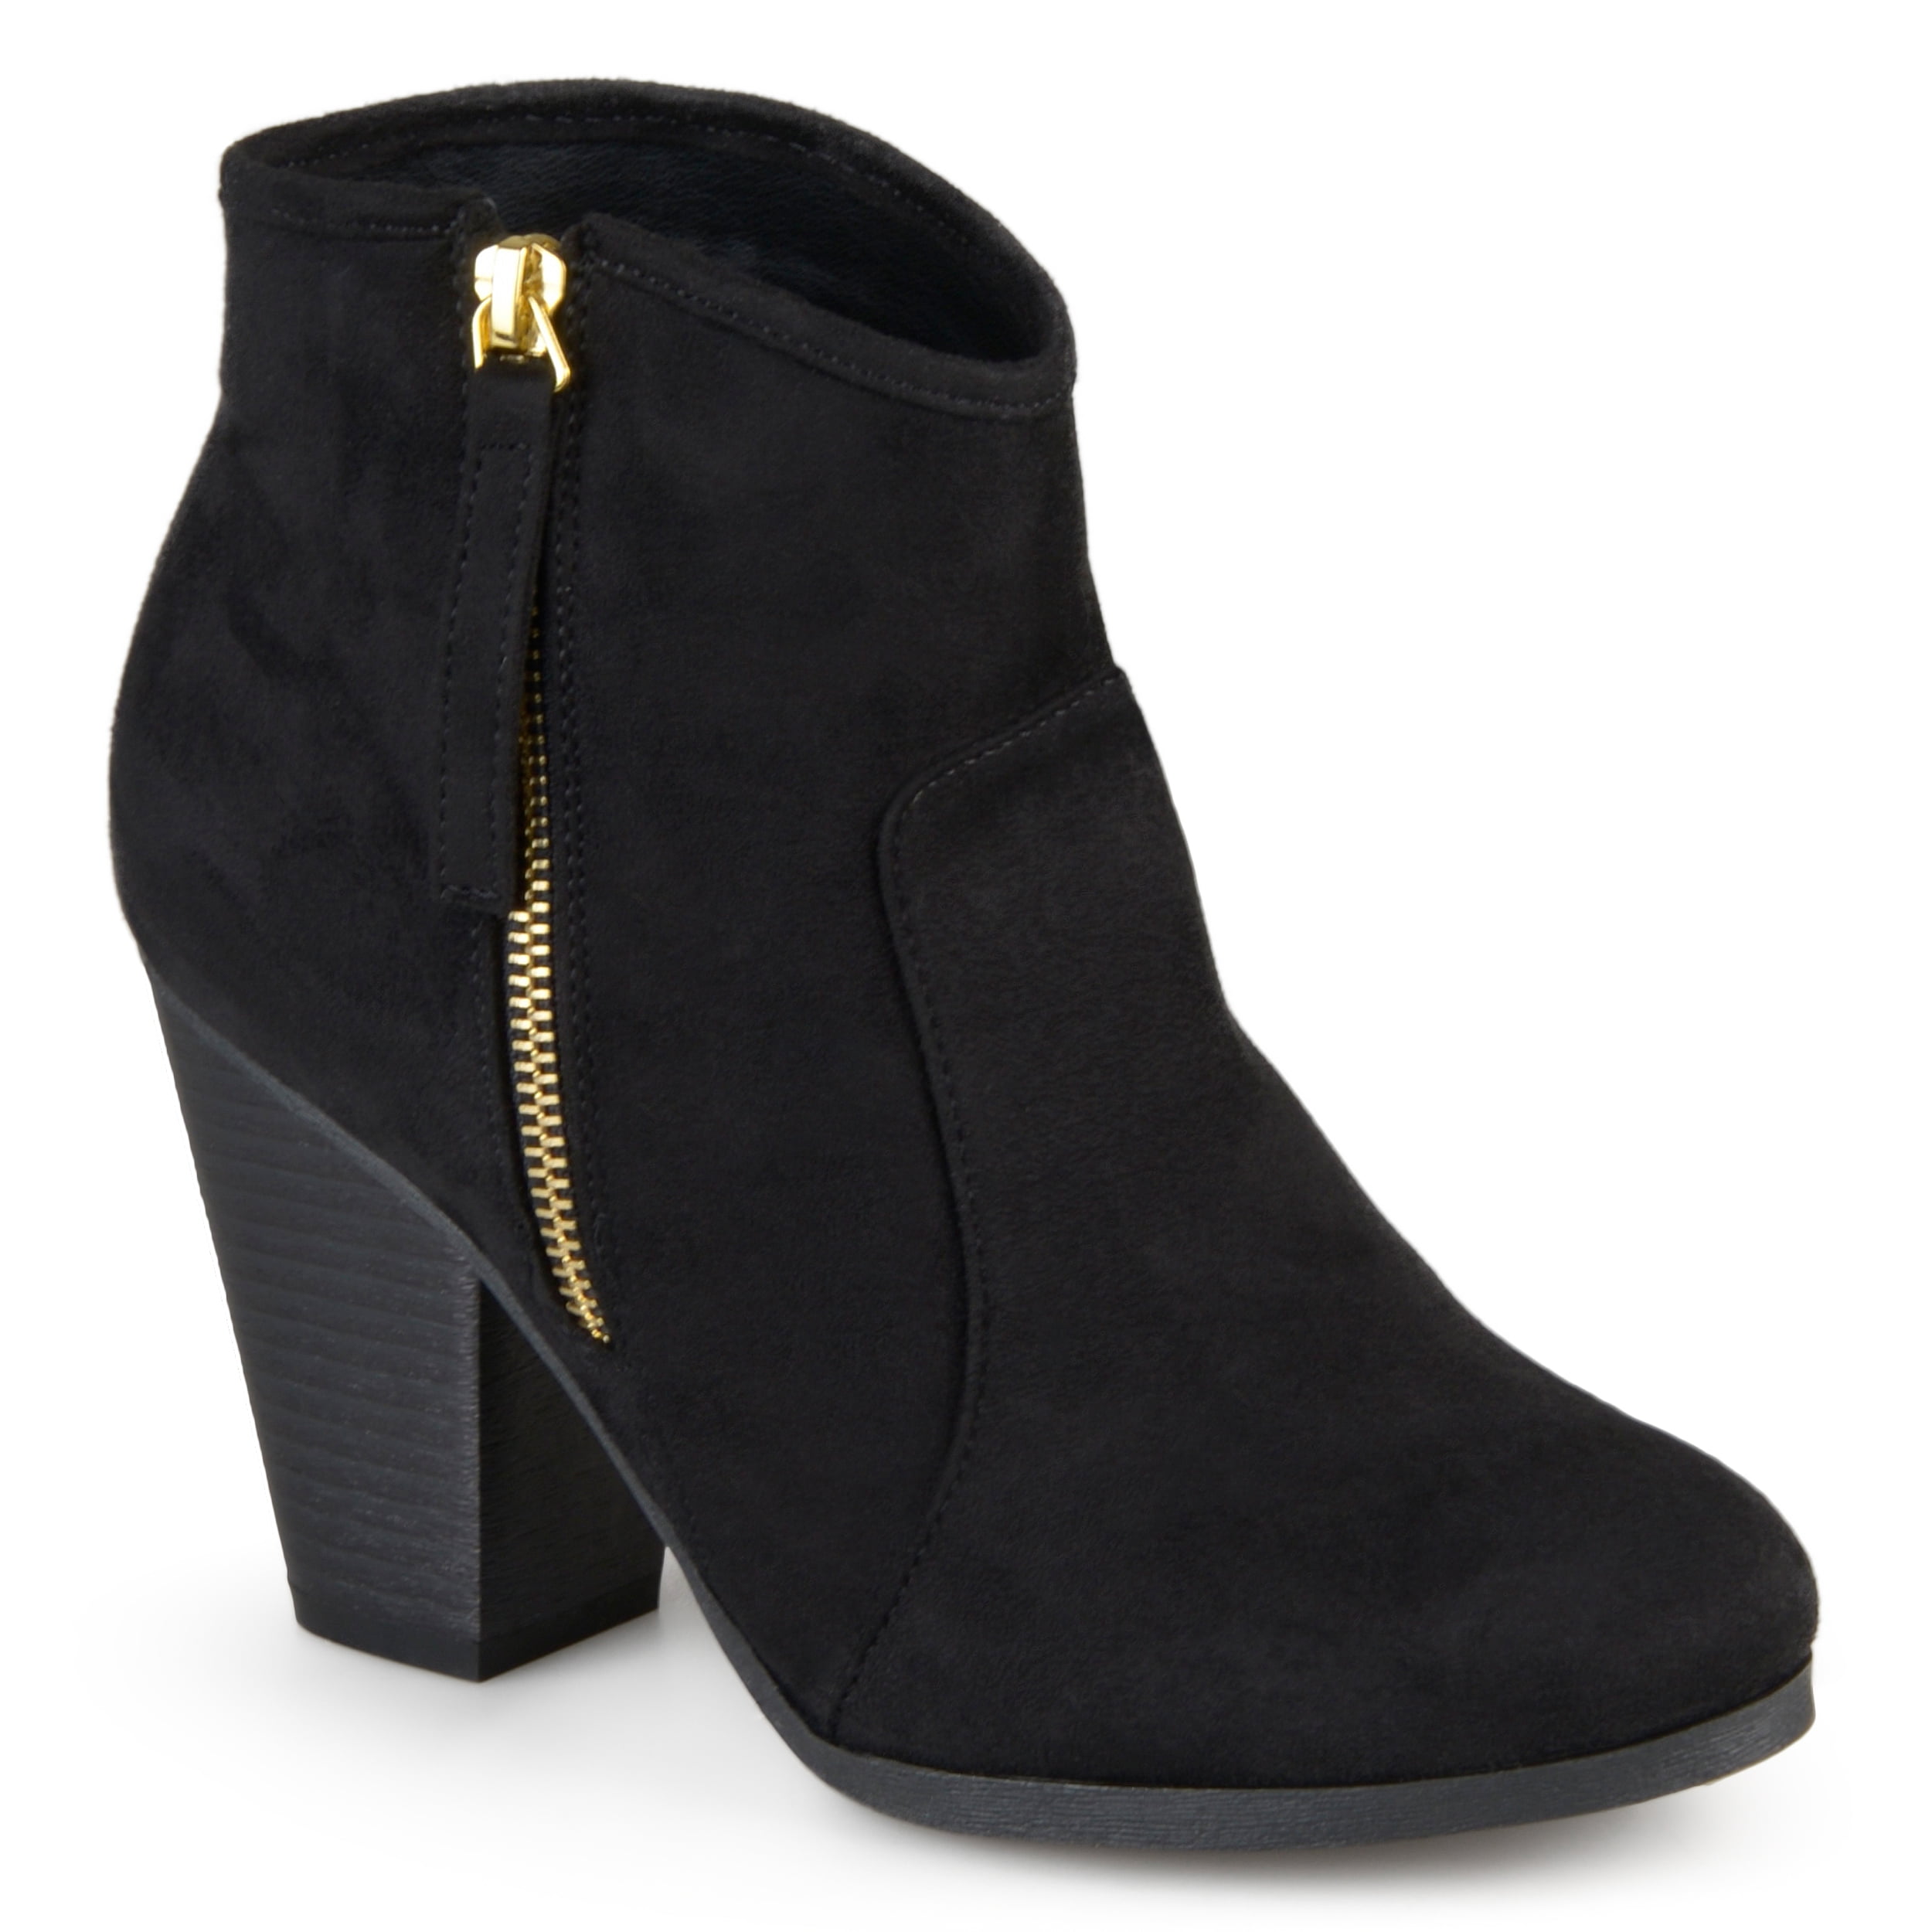 Brinley Co. Women's Faux Suede High Heel Ankle Boots 